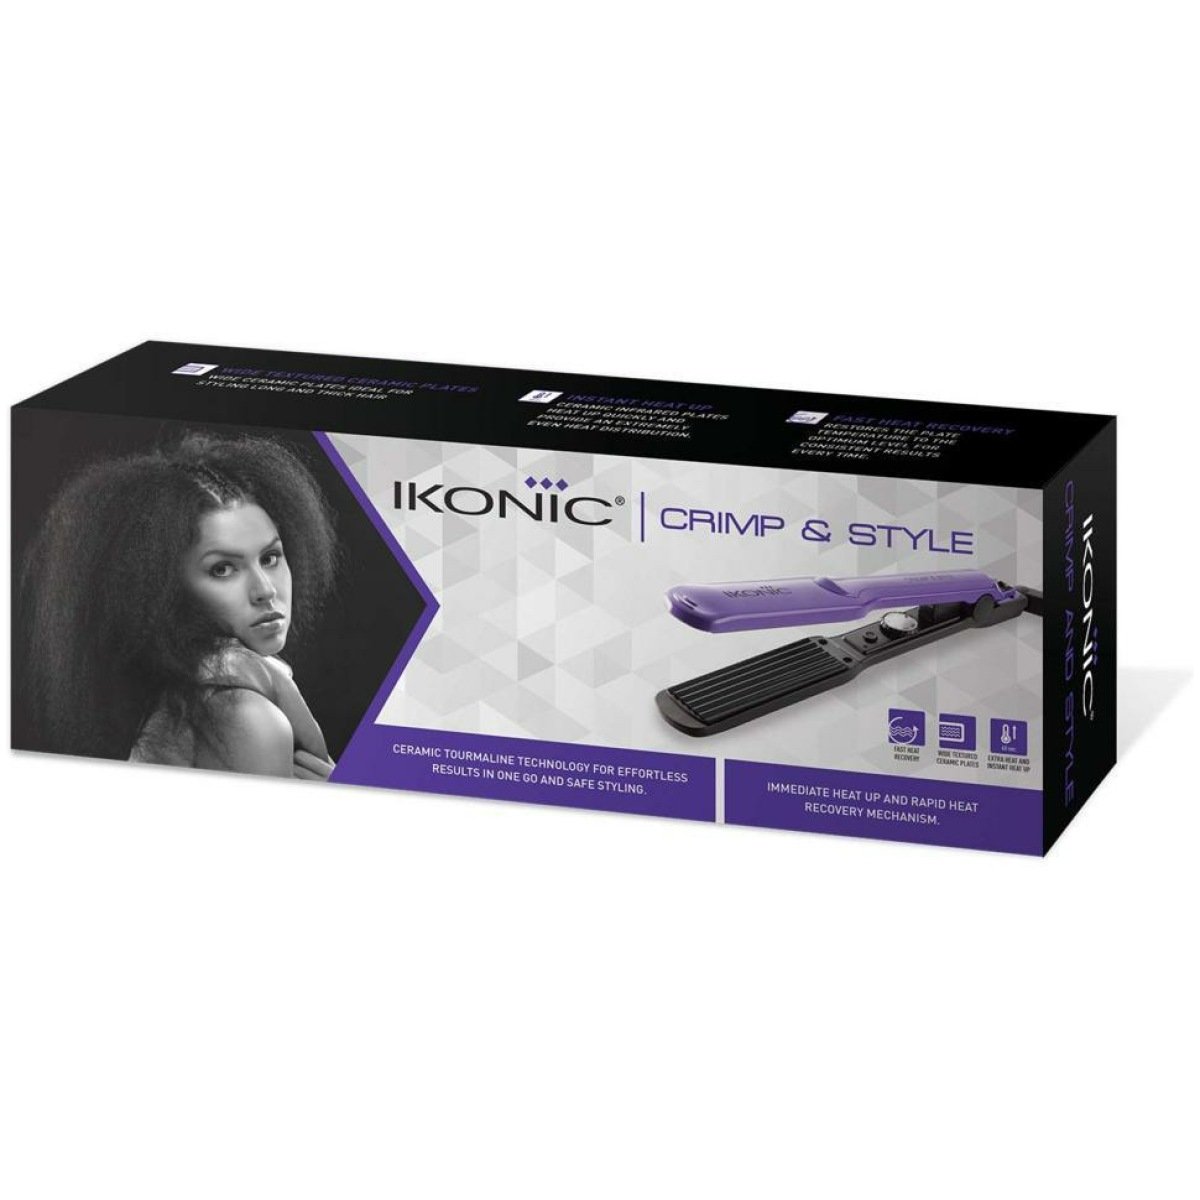 Ikonic Crimp And Style Hair Crimper